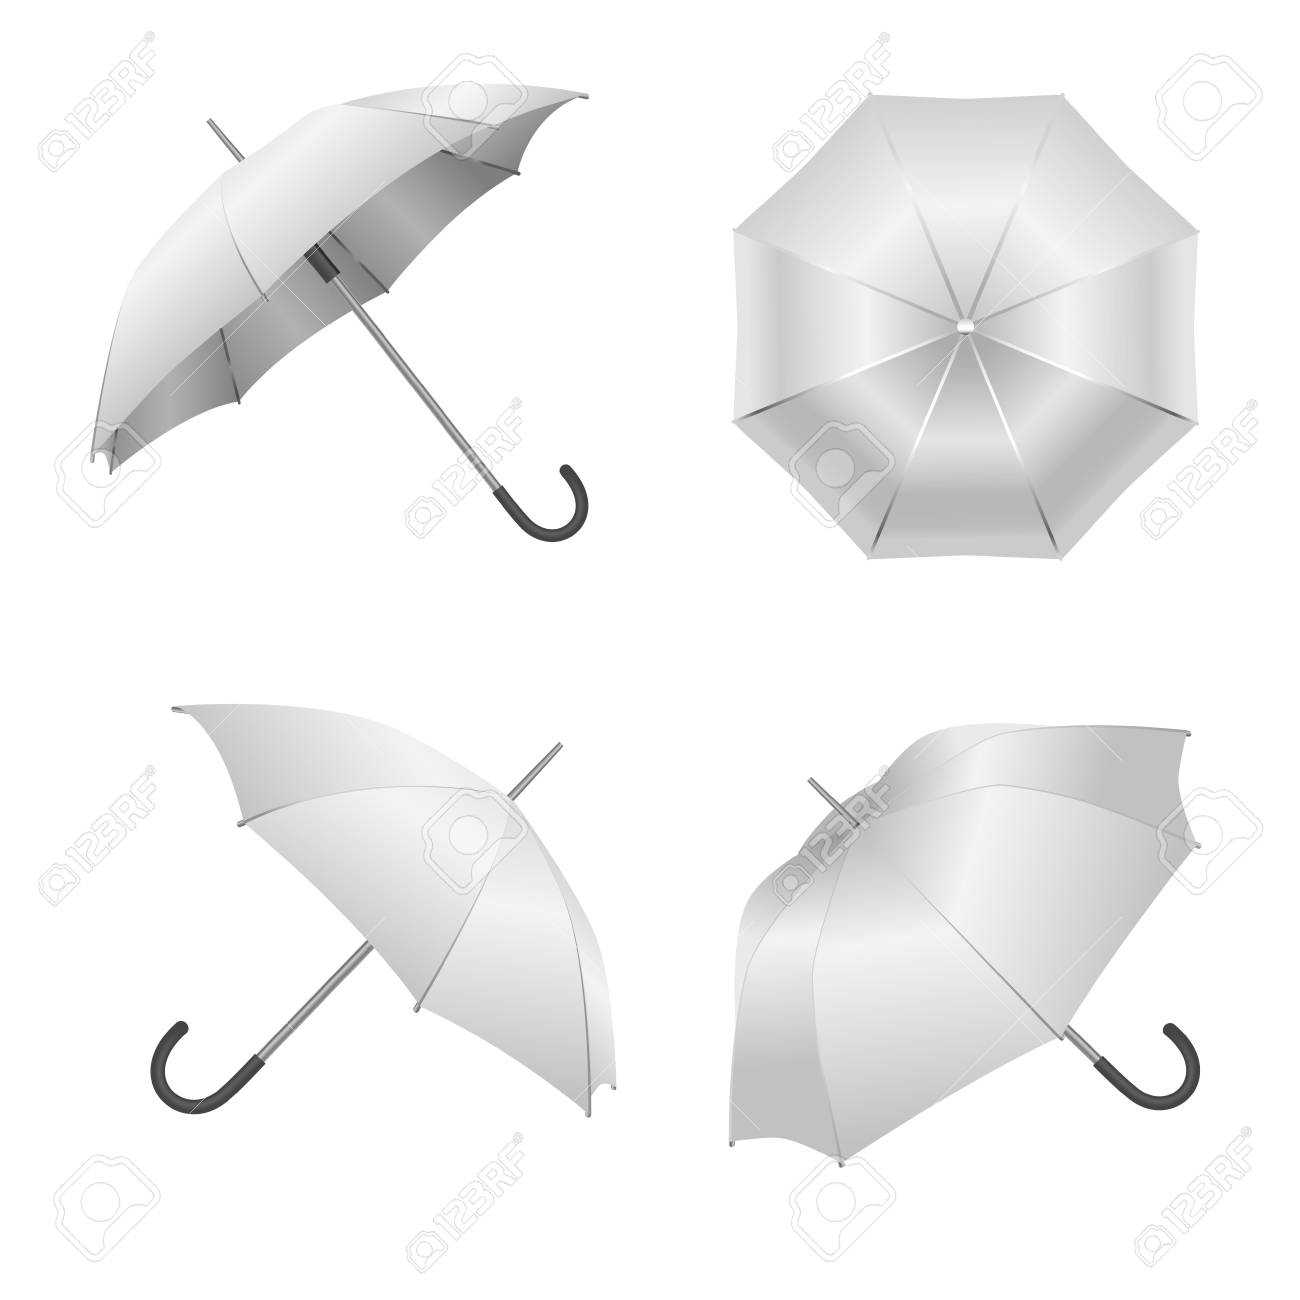 Realistic Detailed 3D White Blank Umbrella Template Mockup Set Pertaining To Blank Umbrella Template